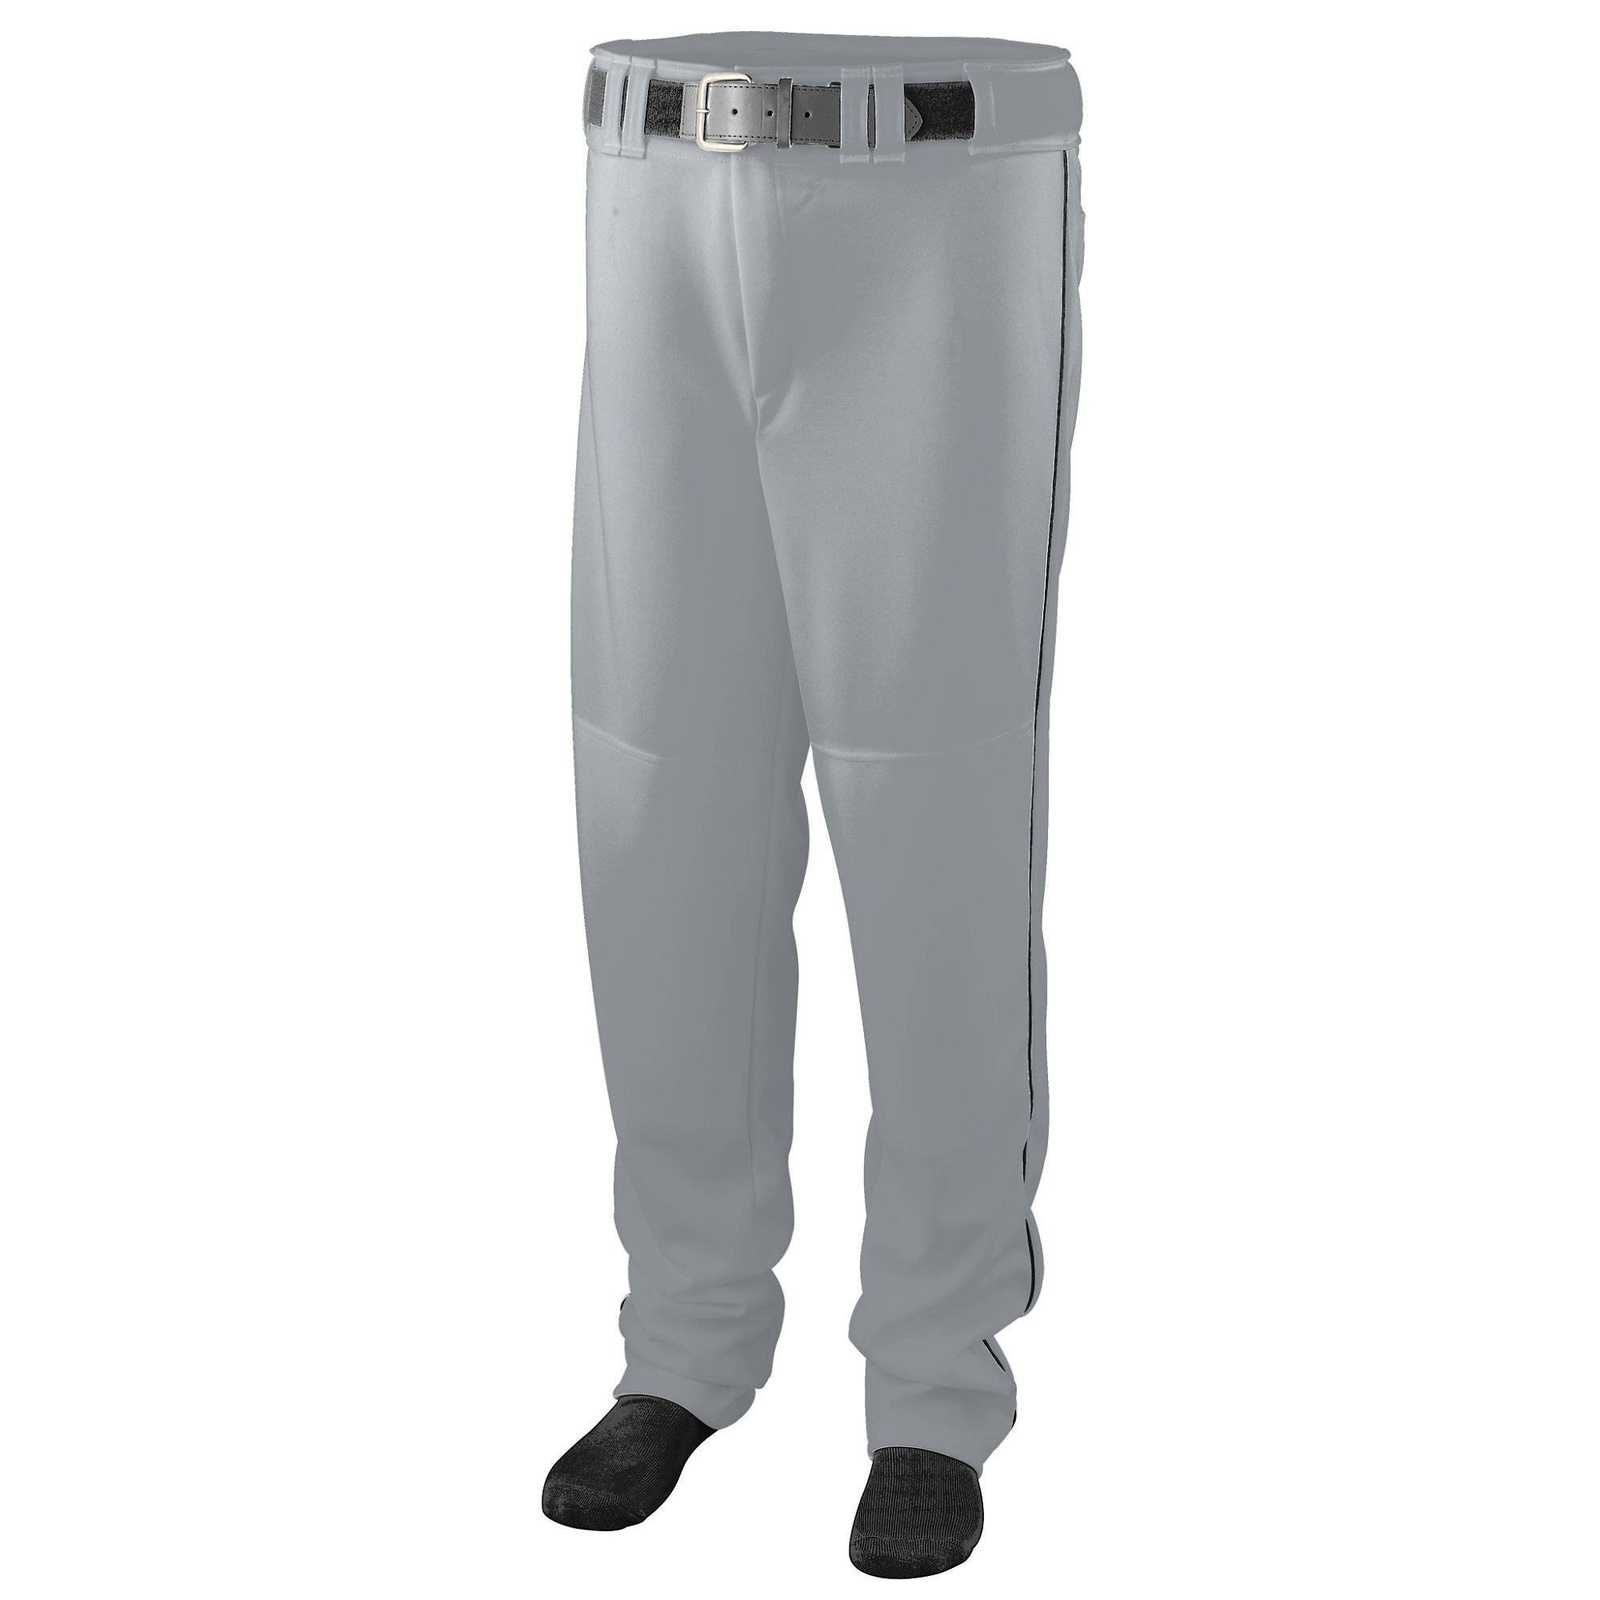 Augusta 1445 Series Baseball Softball Pant with Piping - Gray Black - HIT a Double